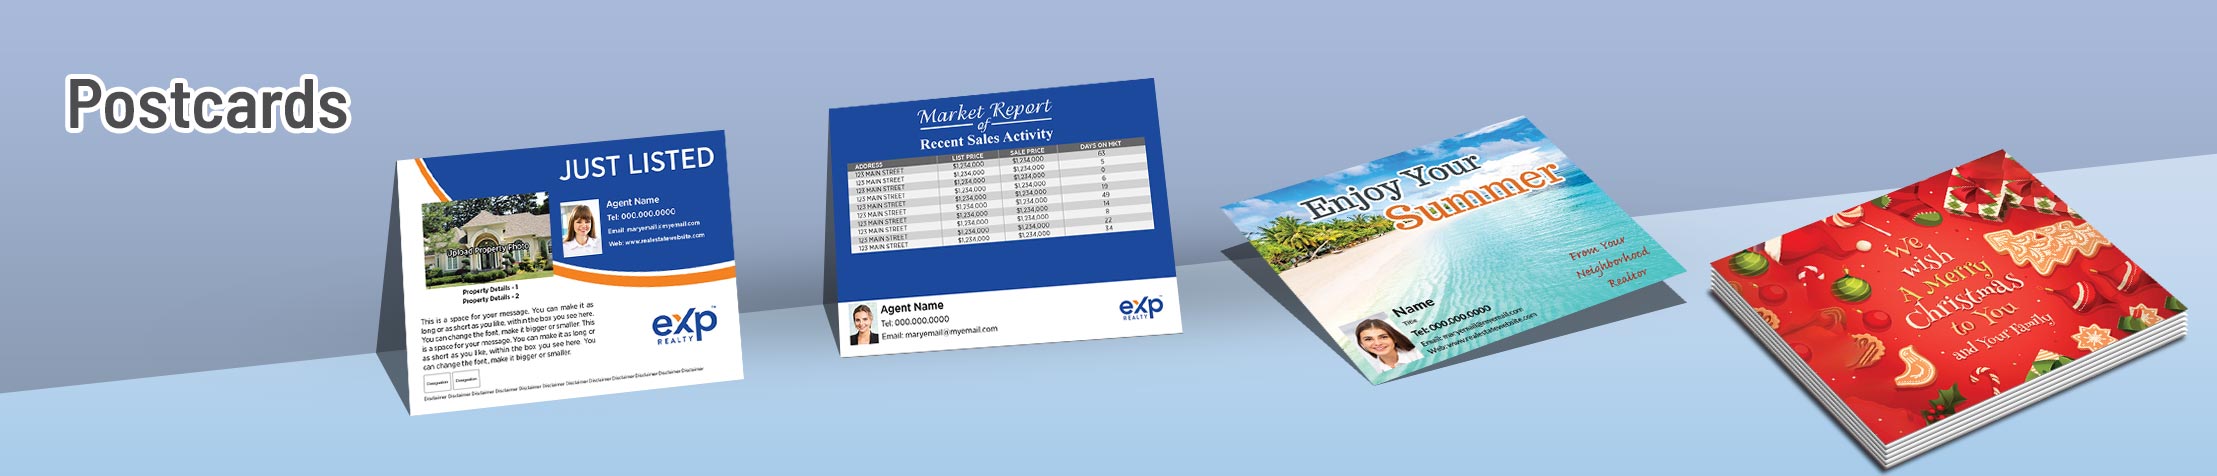 eXp Realty Real Estate Postcards -  postcard templates and direct mail postcard mailing services | Sparkprint.com